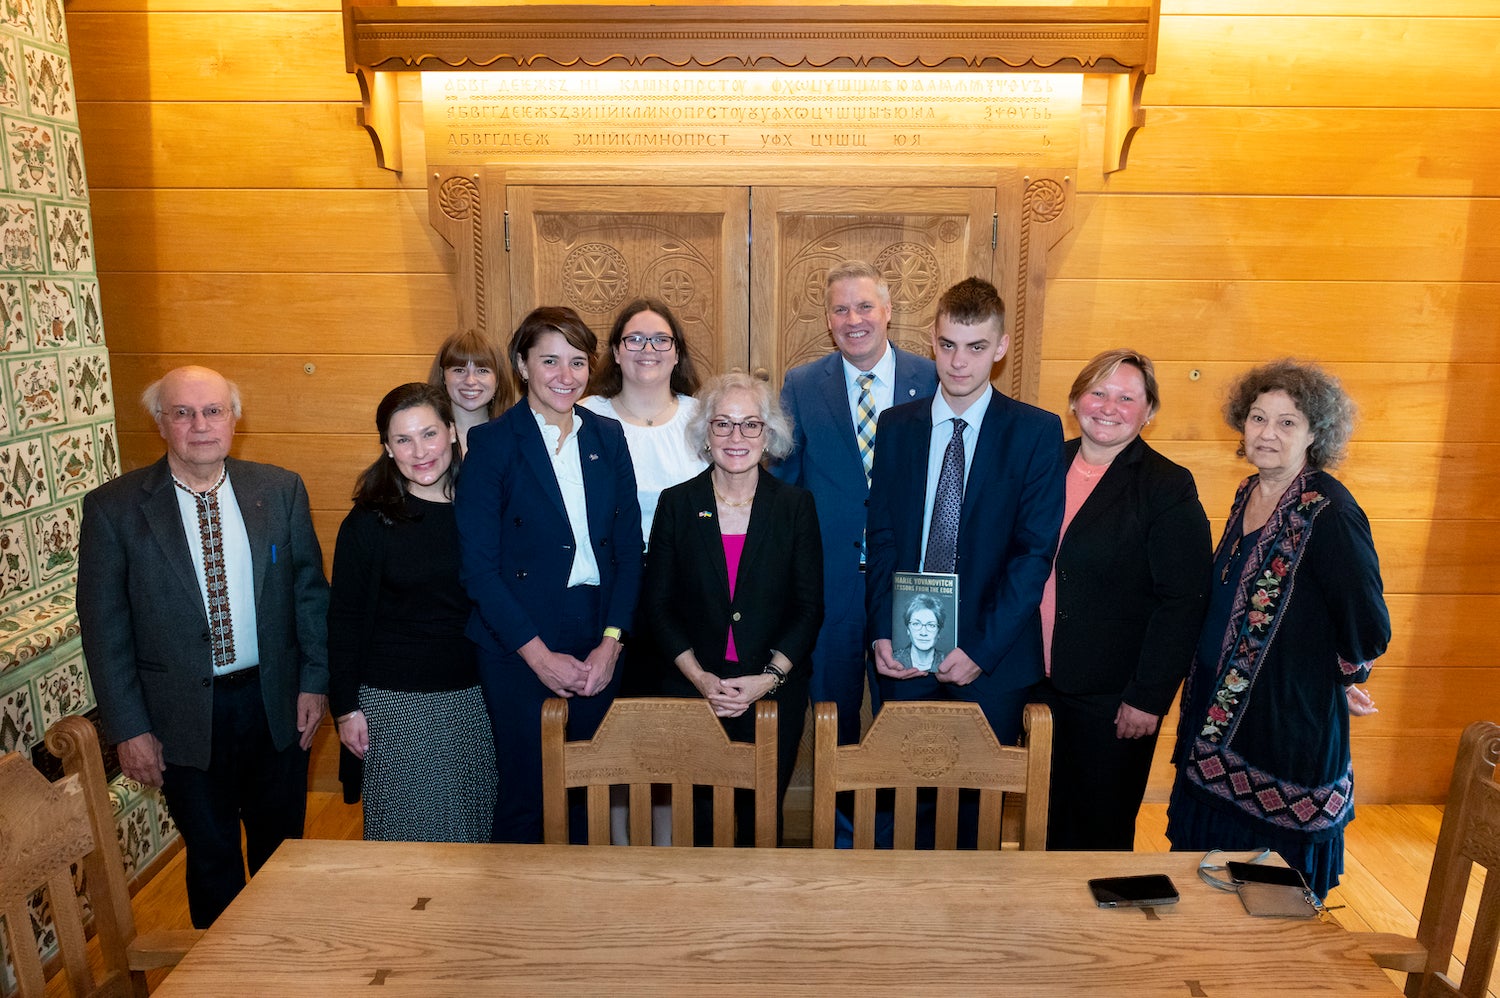 "Marie Yovanovitch, Dean Carissa Slotterback, Chancellor Patrick Gallagher, and 7 other Pitt community members pose for a group photo in the Ukrainian Nationality Room. One student holds a copy of Yovanovitch's memoir, Lessons from the Edge."